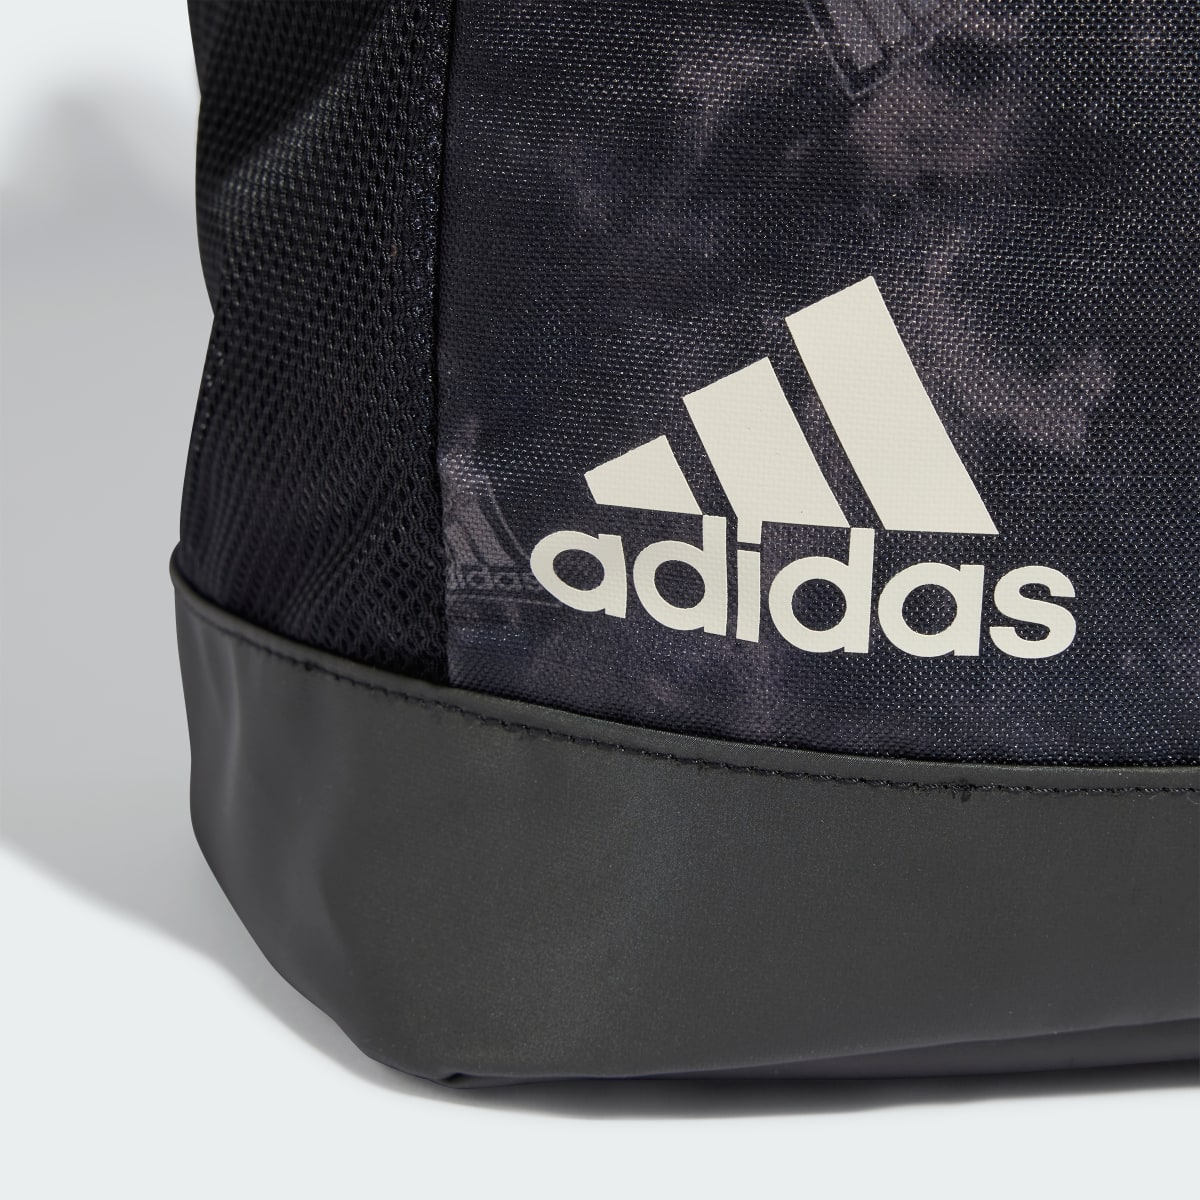 Adidas Linear Graphic Backpack. 7